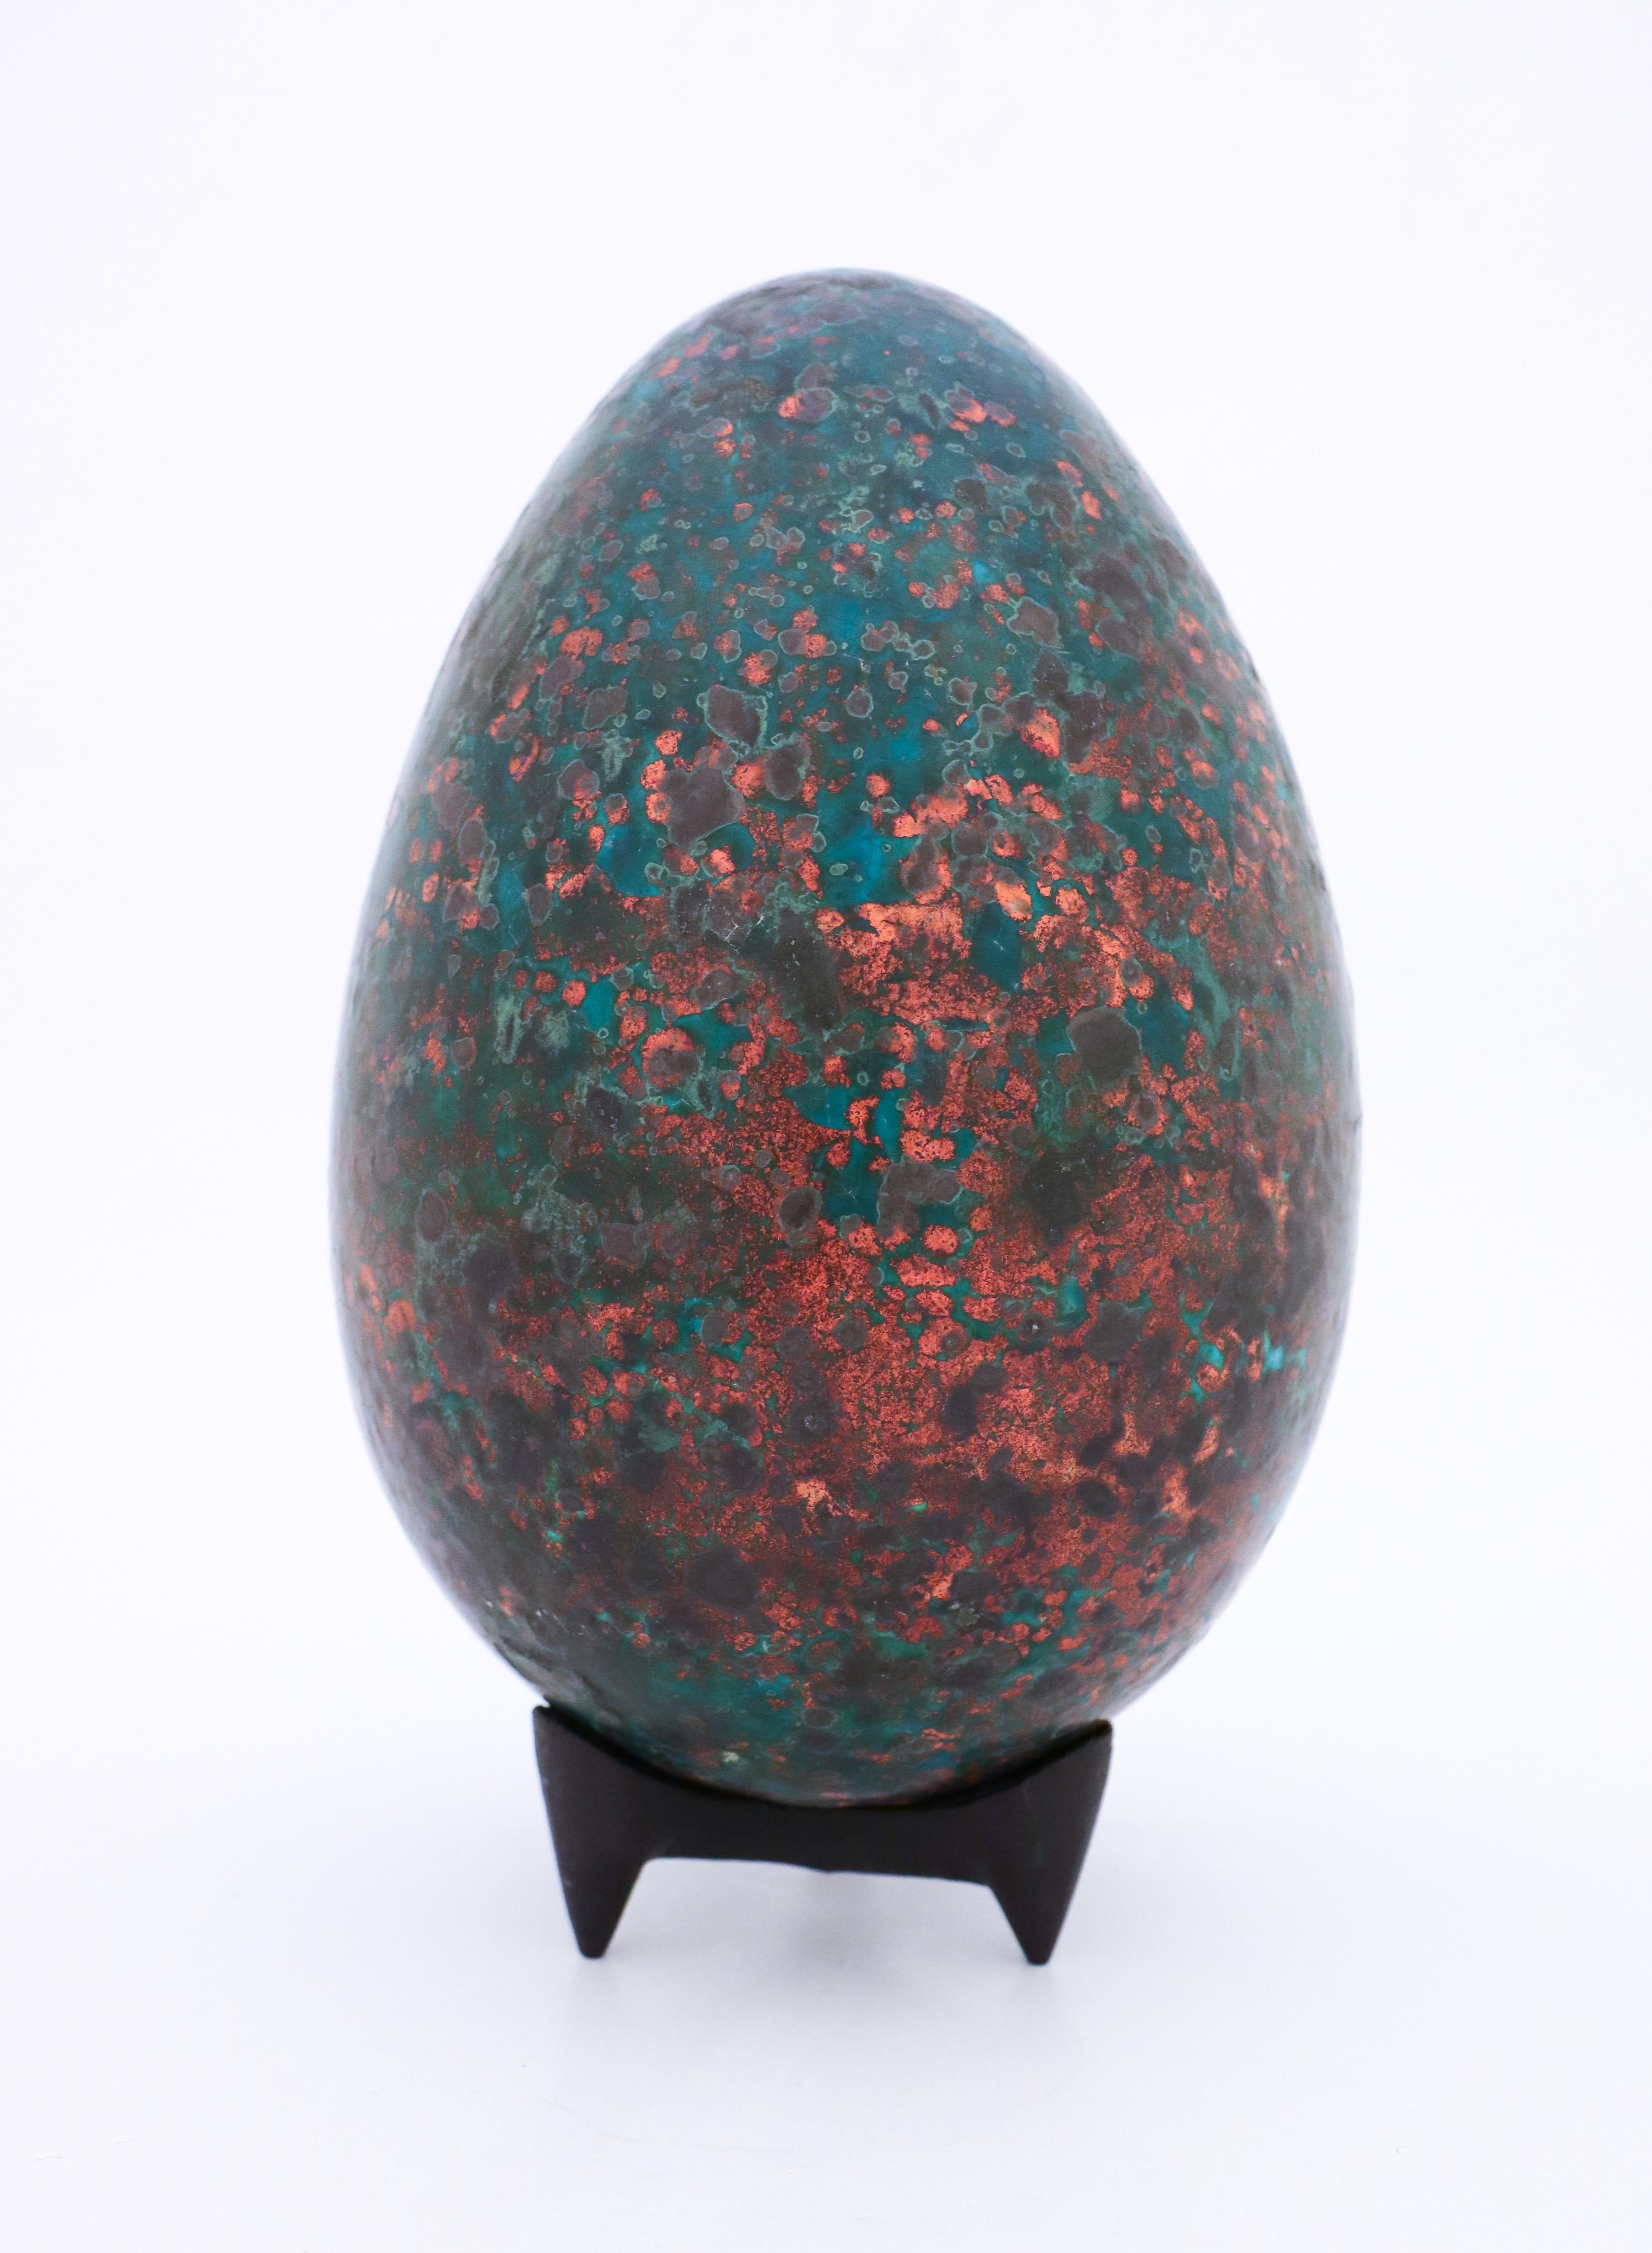 Egg designed by the Swedish ceramicist Hans Hedberg, who lived and worked in Biot, France. This egg is 30 cm (11,6